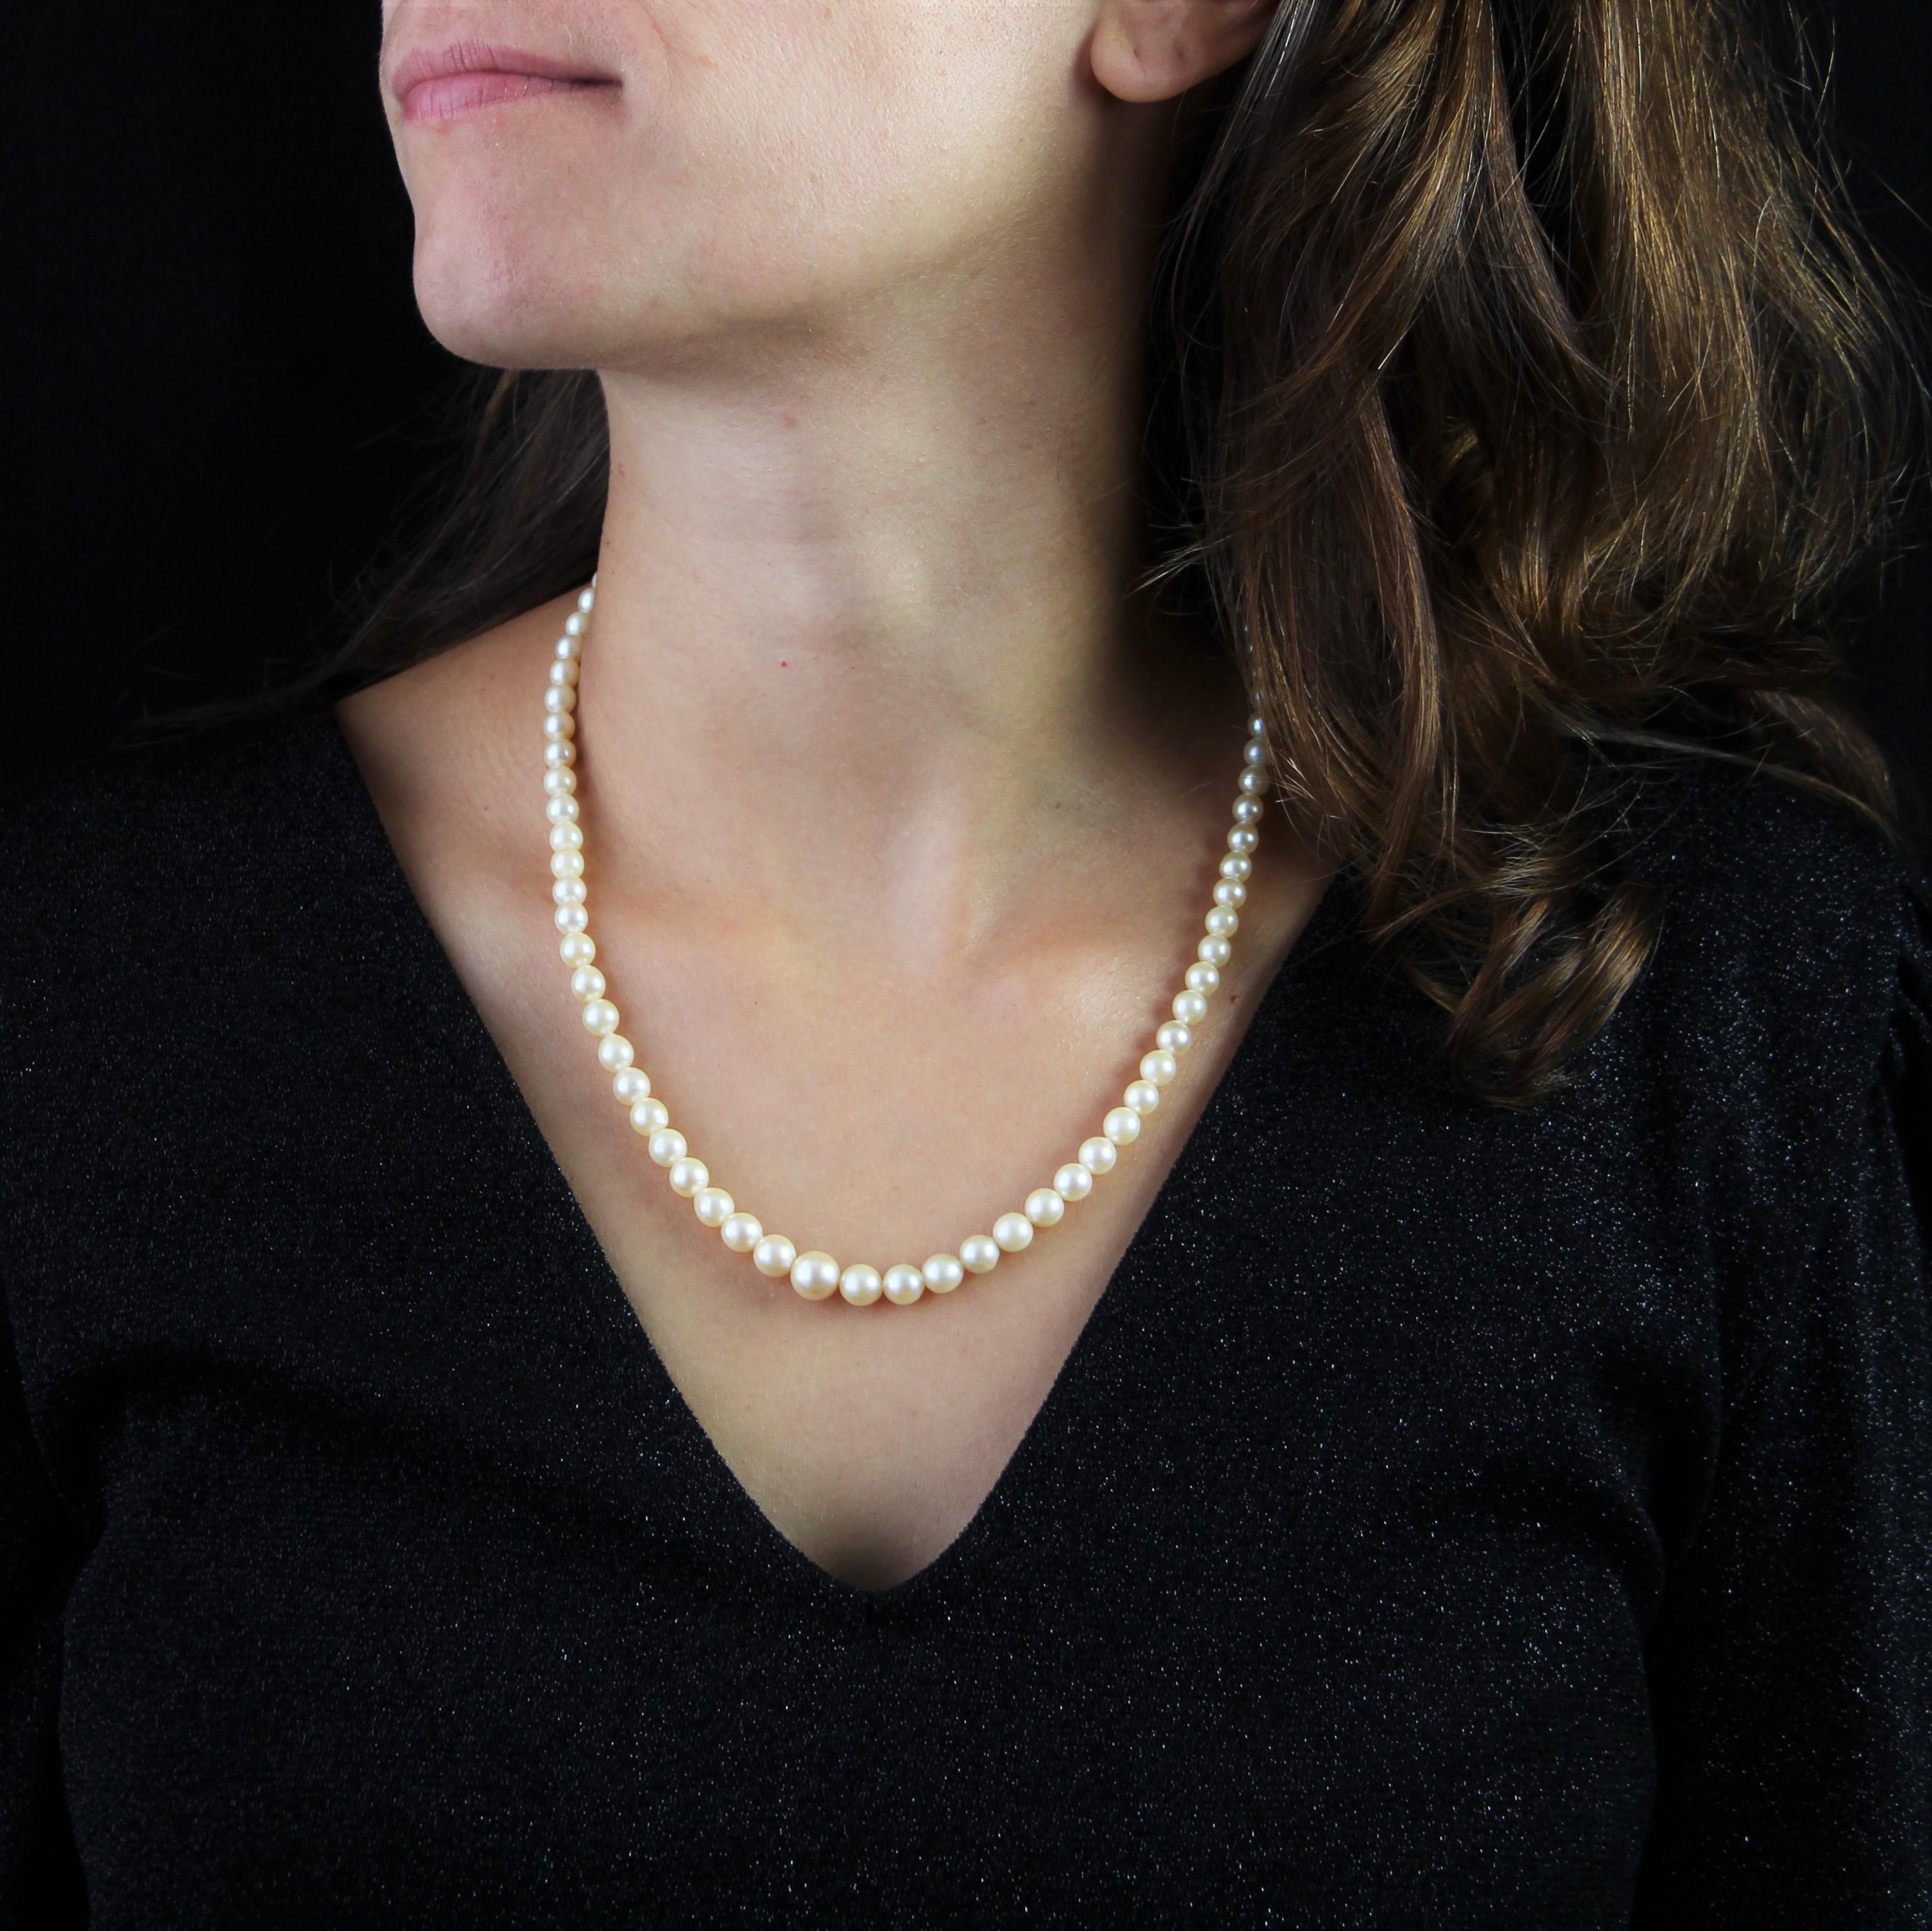 Necklace of cultured pearls in fall, with pearly white orient.
The pearls are retained by a 18 karat white gold clasp, with safety, and decorated on its top of 3 half cultured pearls.
Diameter of pearls : from 3/3,5 mm to 7,5/8 mm.
Length : 45,5 cm